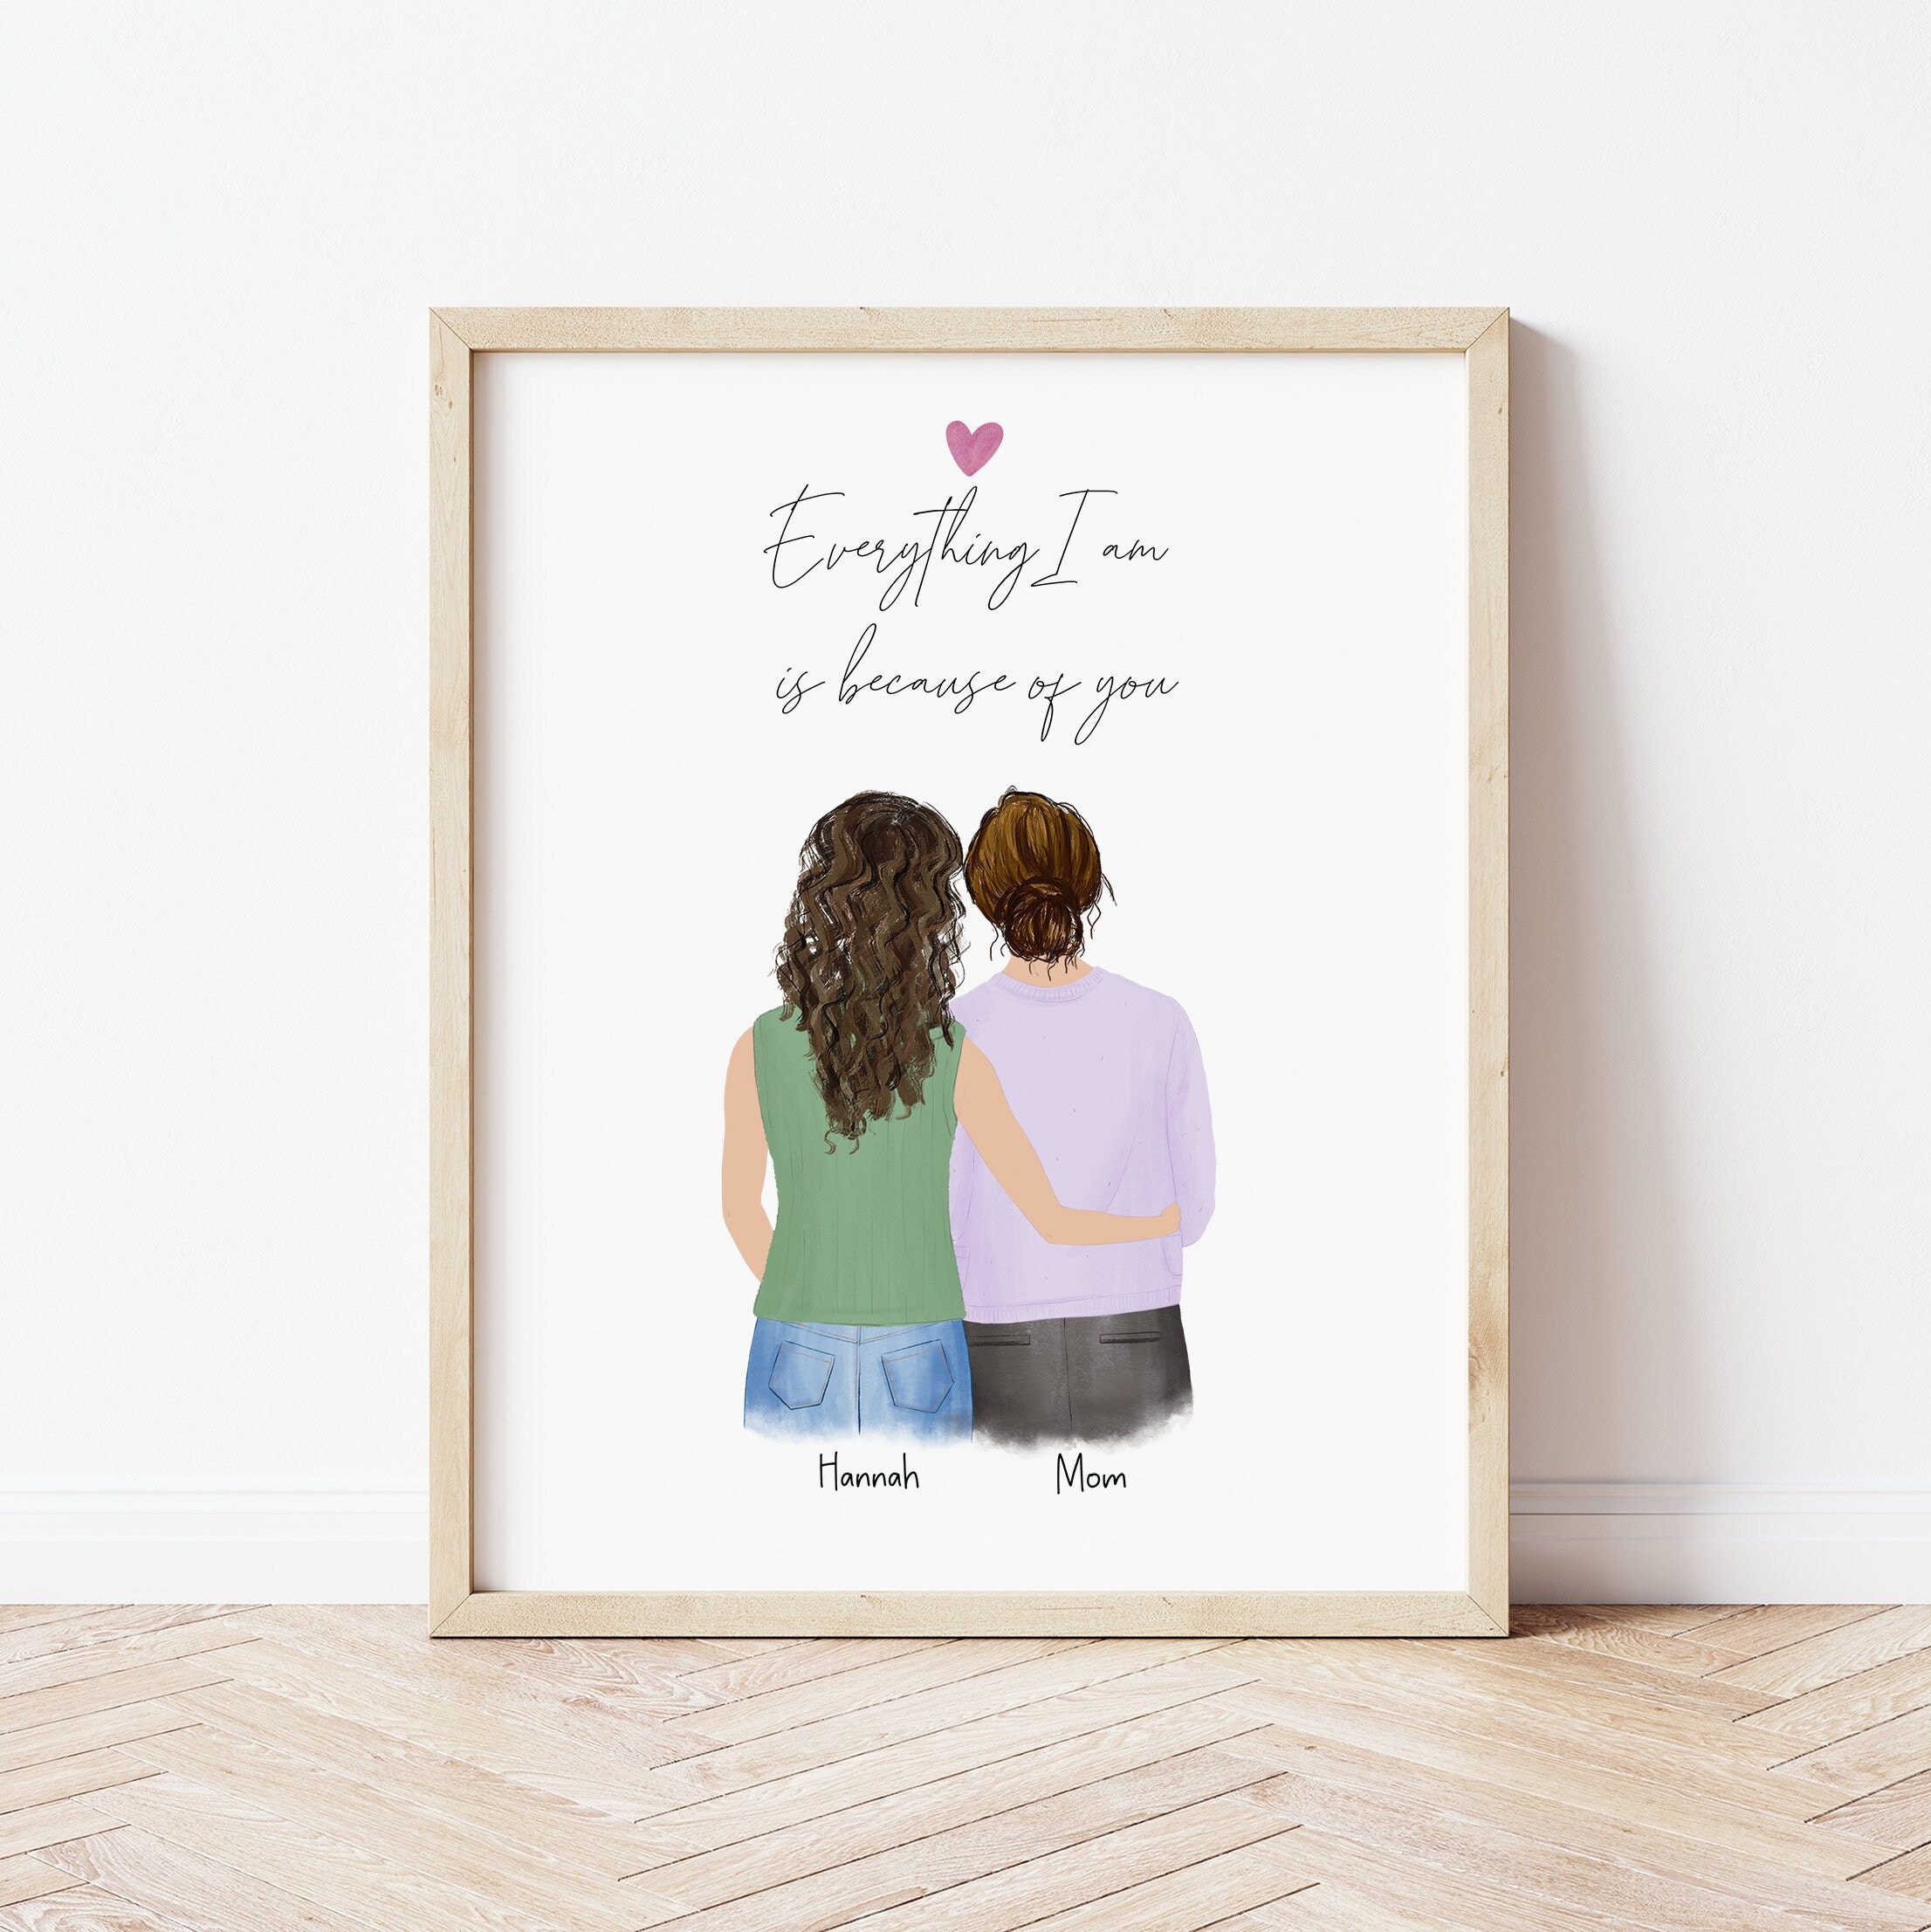 Gifts For Mom Mothers Day Gifts For Her Birthday Gifts For Mom Christmas  Gif CL1